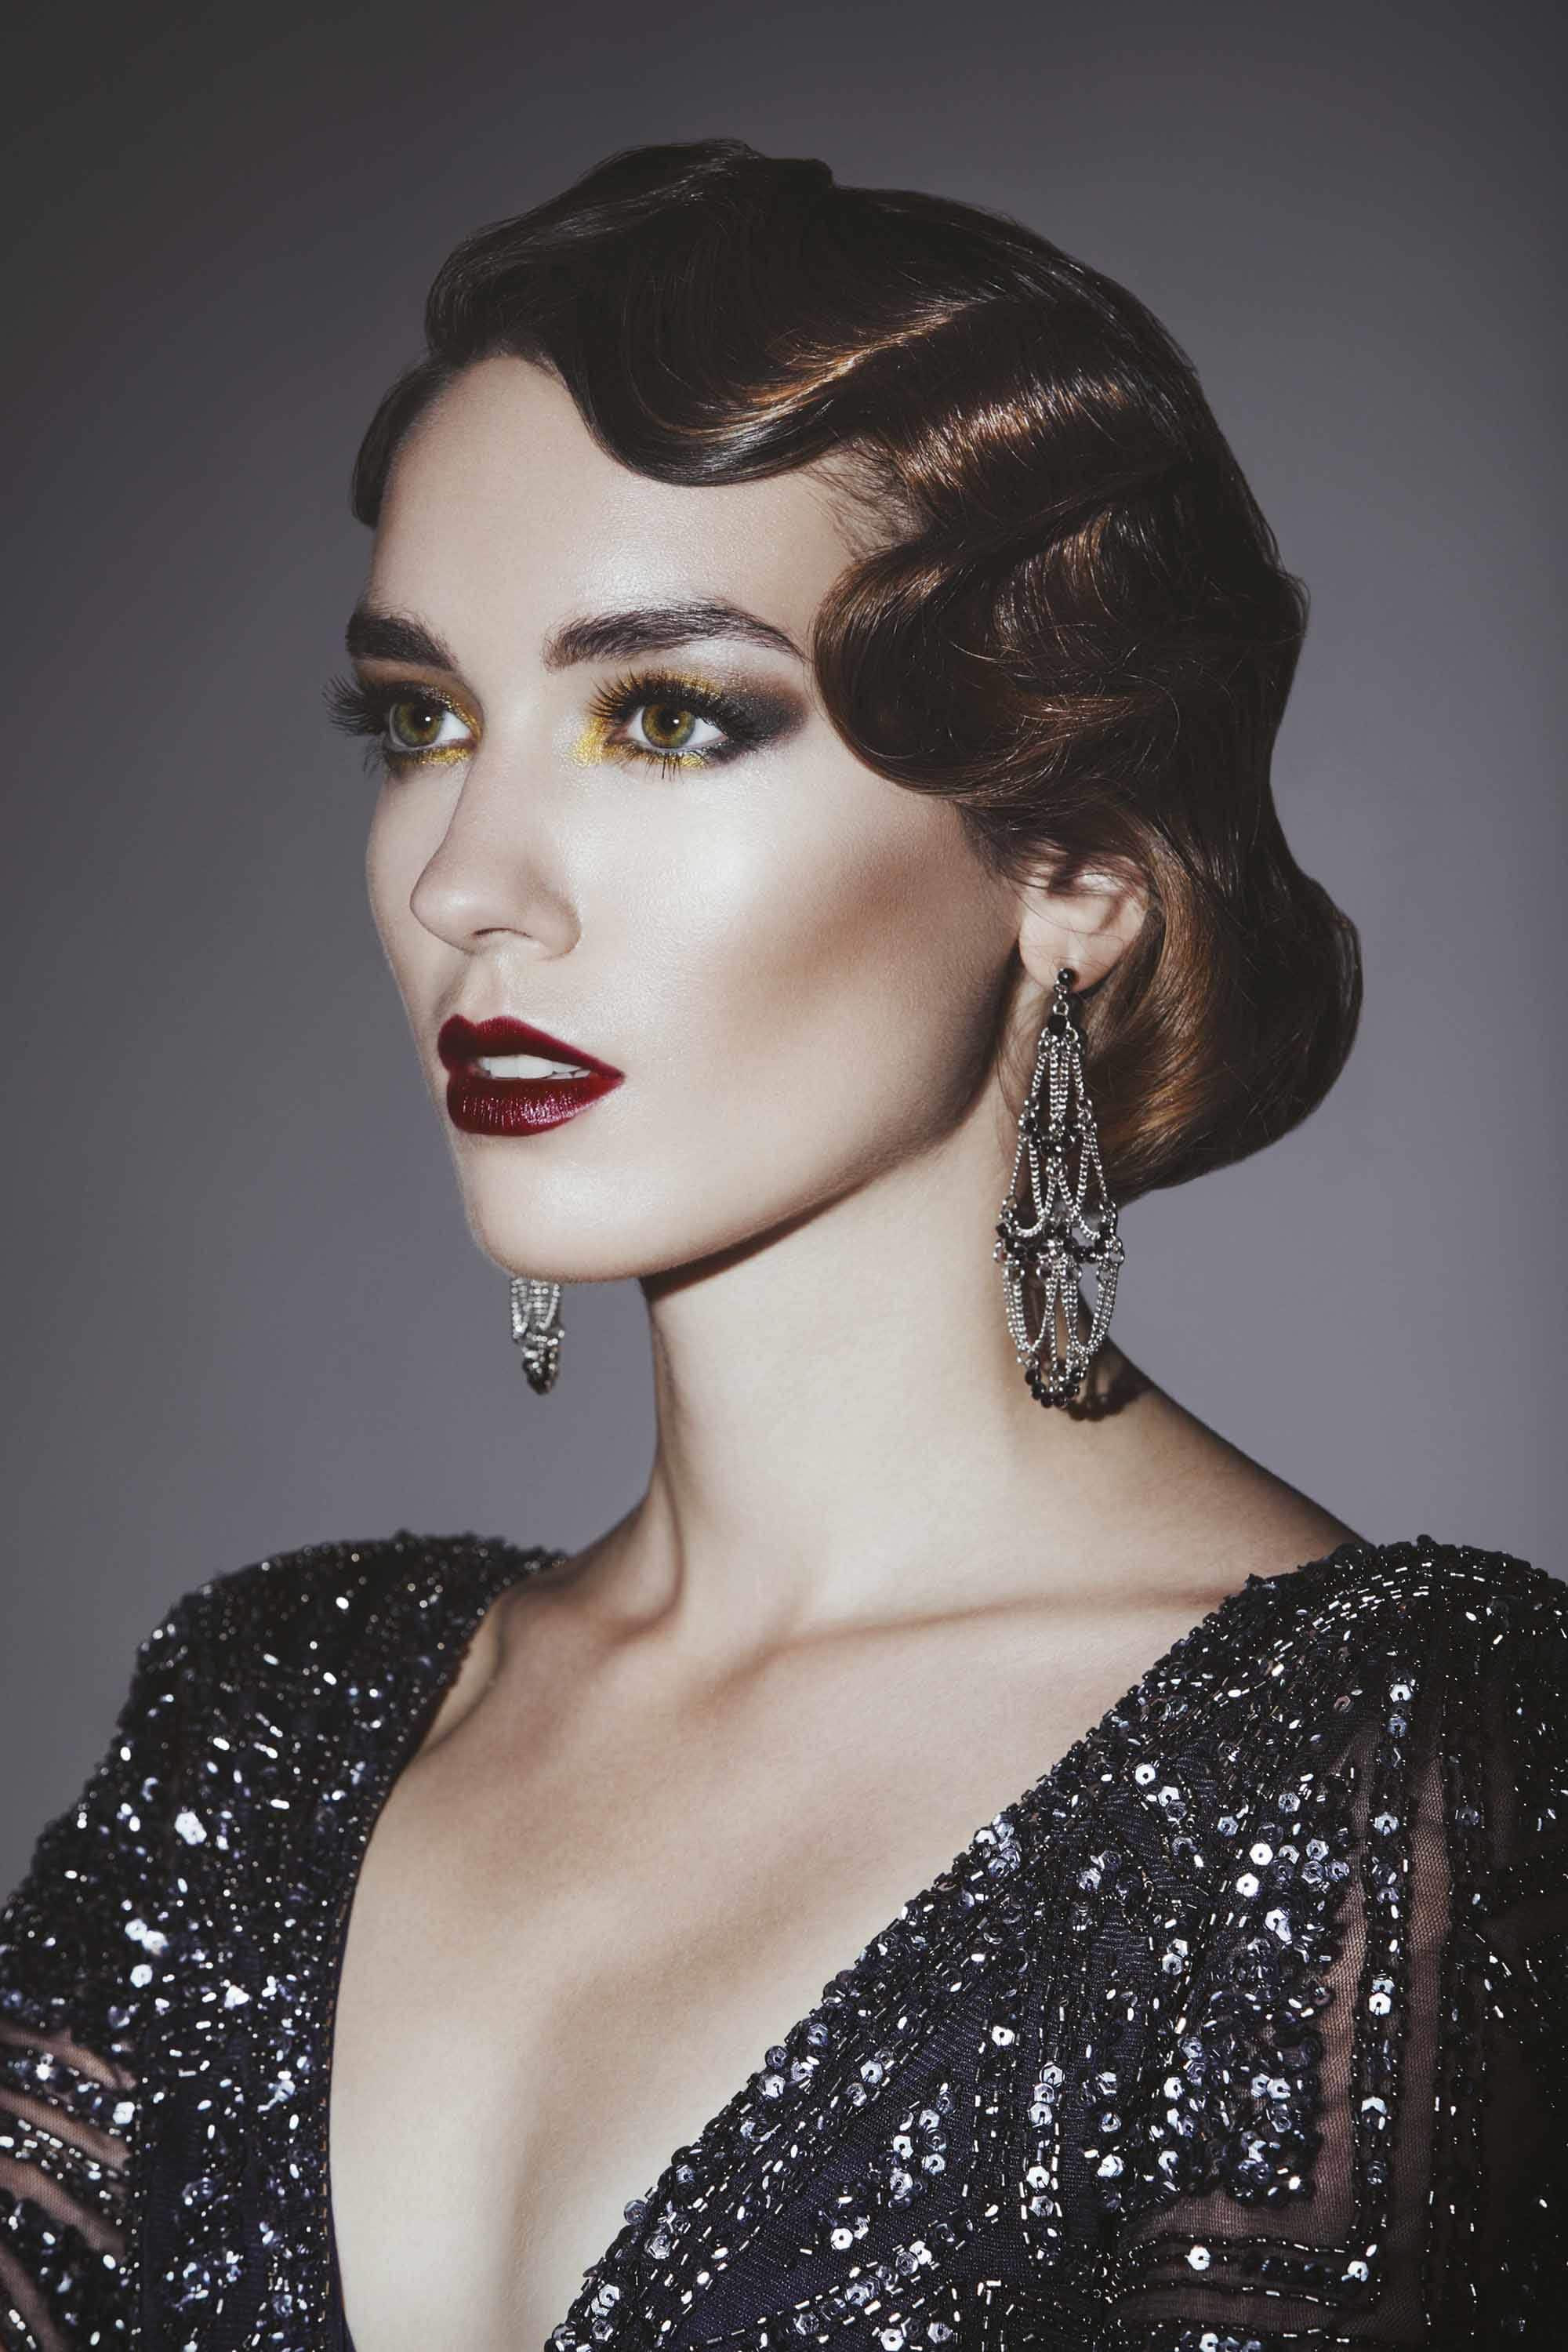 Gatsby Frisuren
 11 Great Gatsby inspired hair ideas for Halloween and